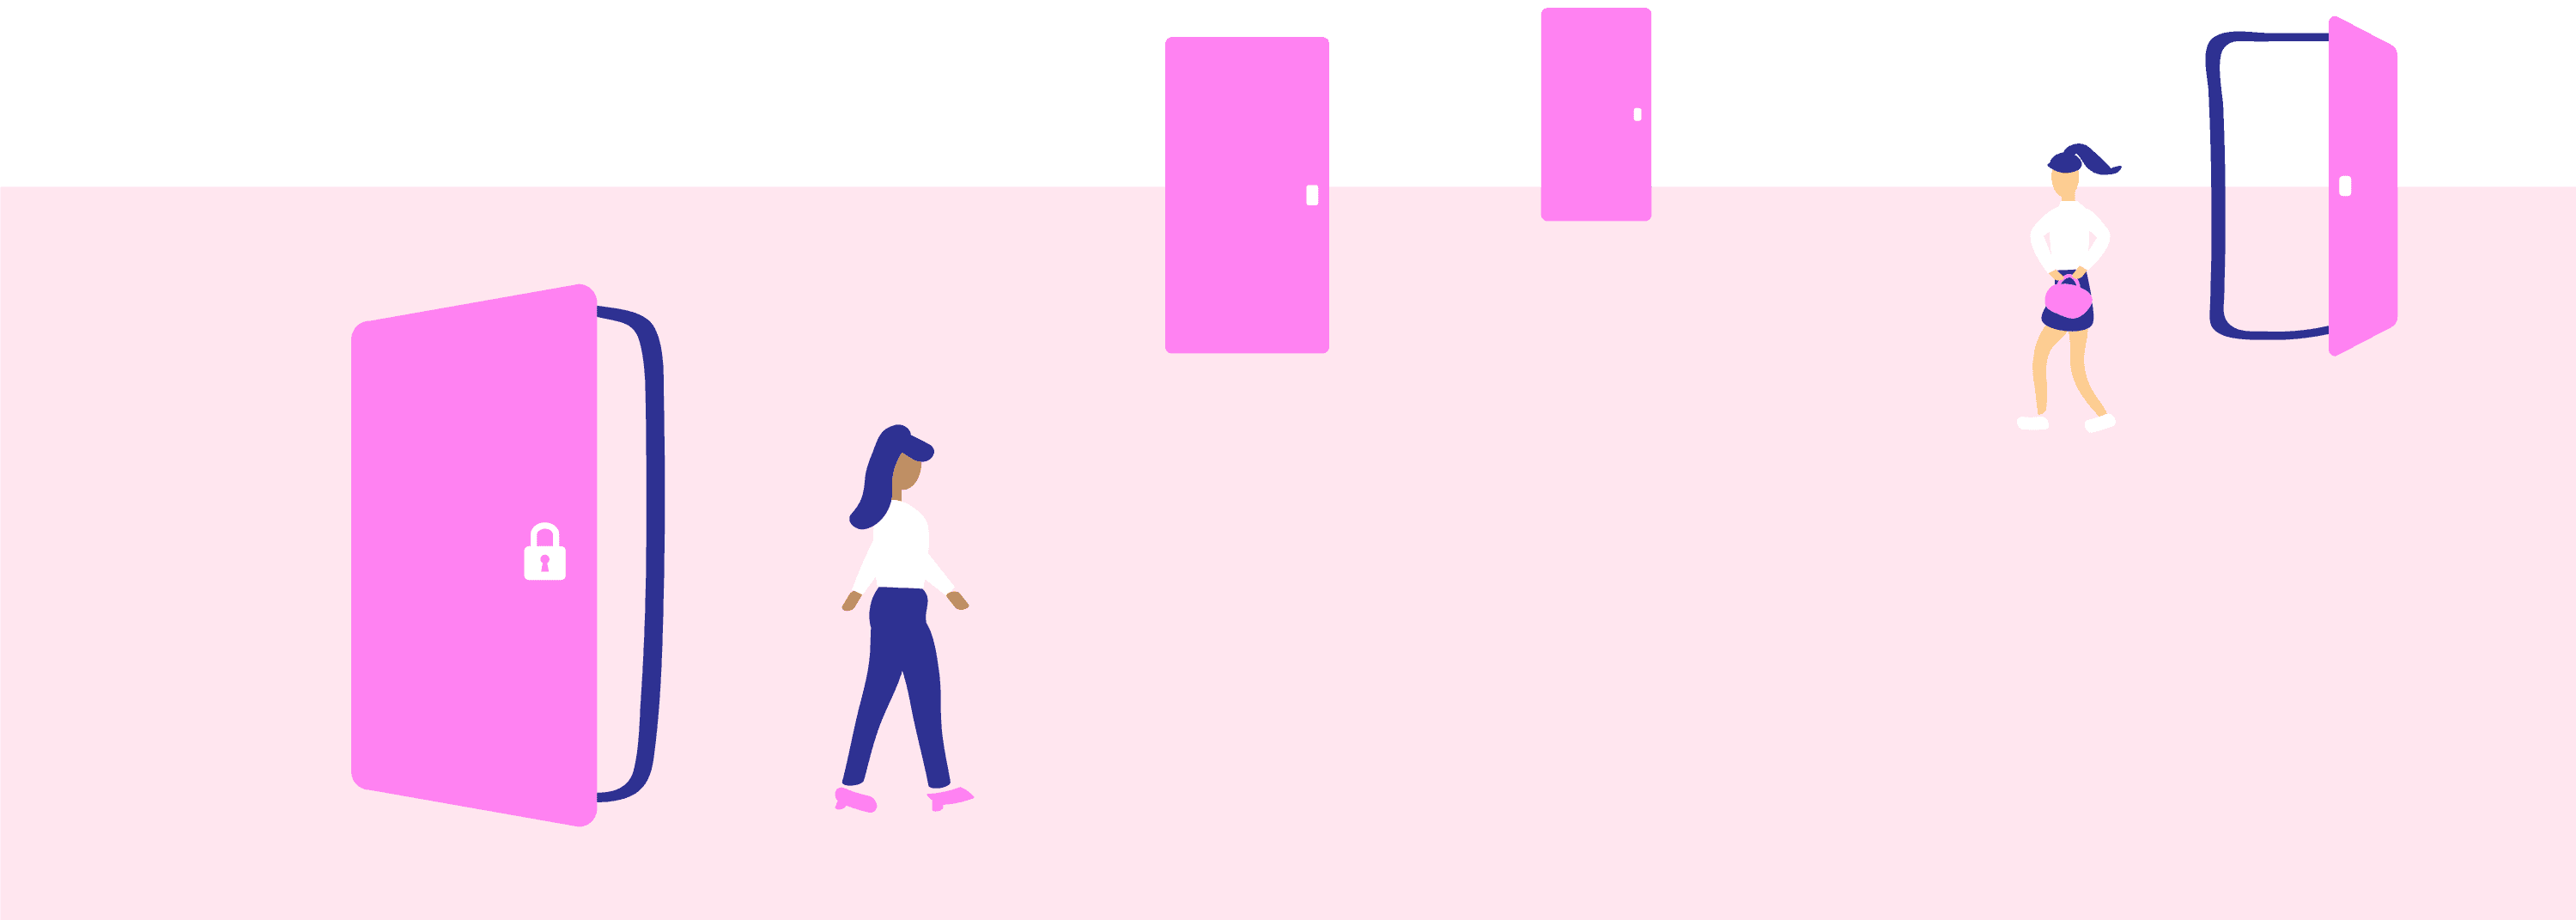 Illustration of women walking out of a series of doors